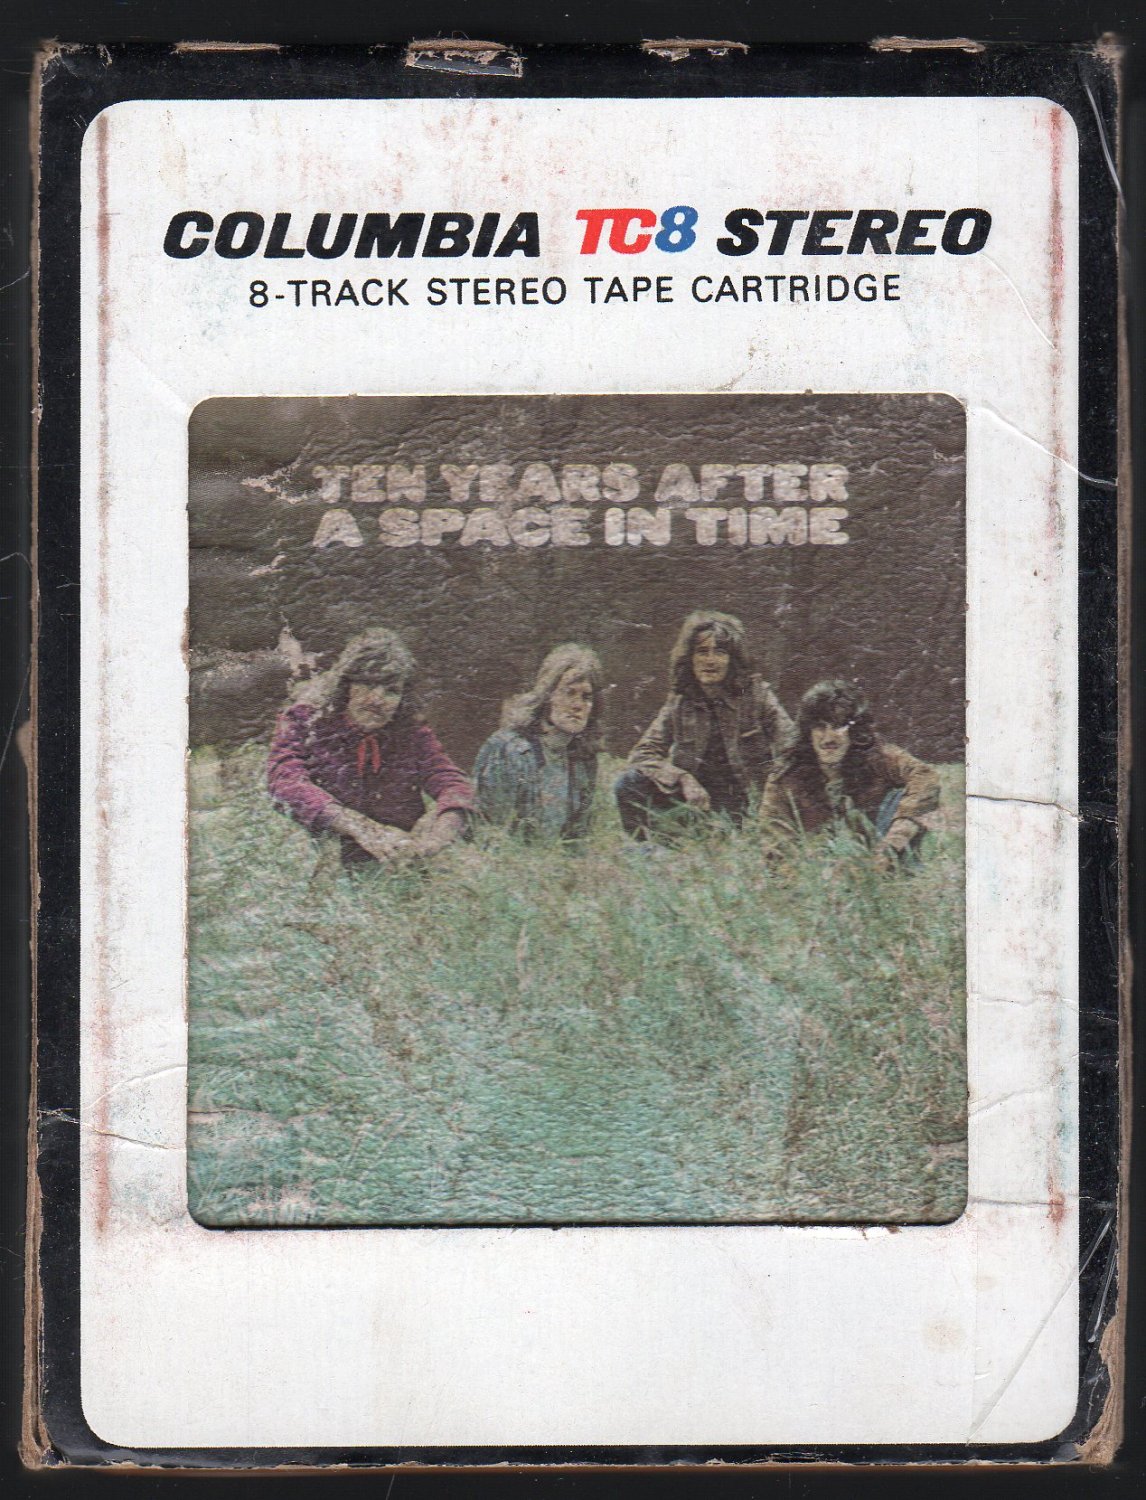 album cover ten years after a space in time